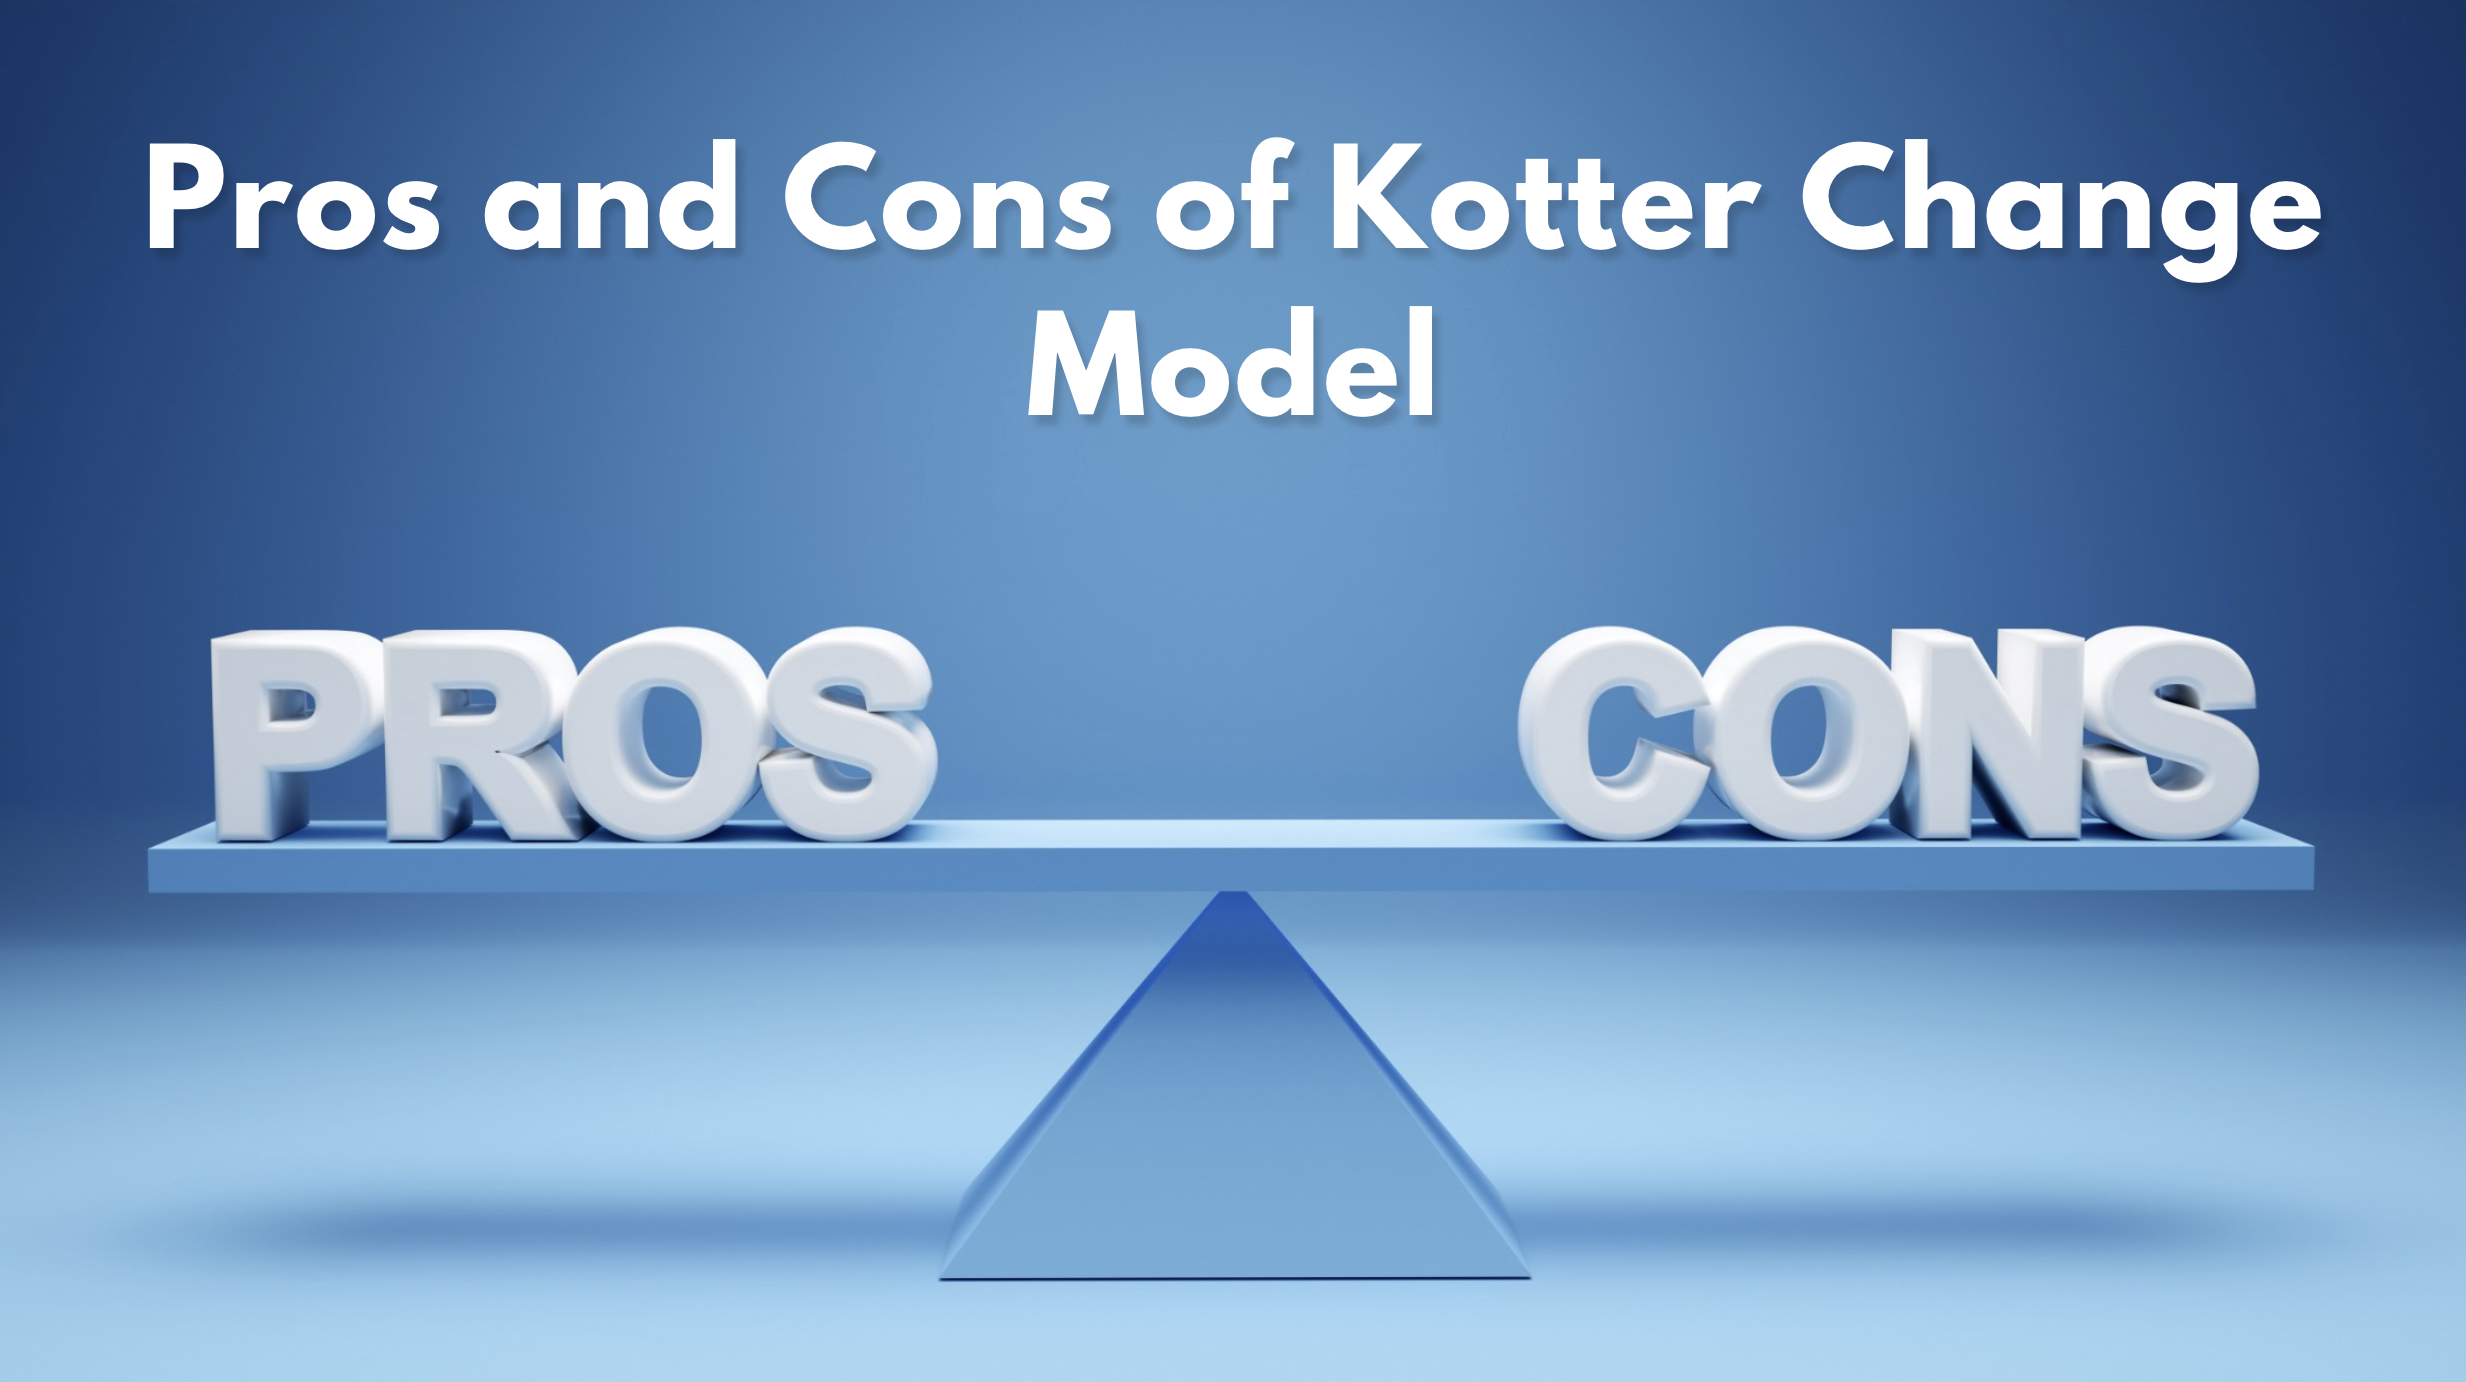 pros and cons of kotter's 8 step model